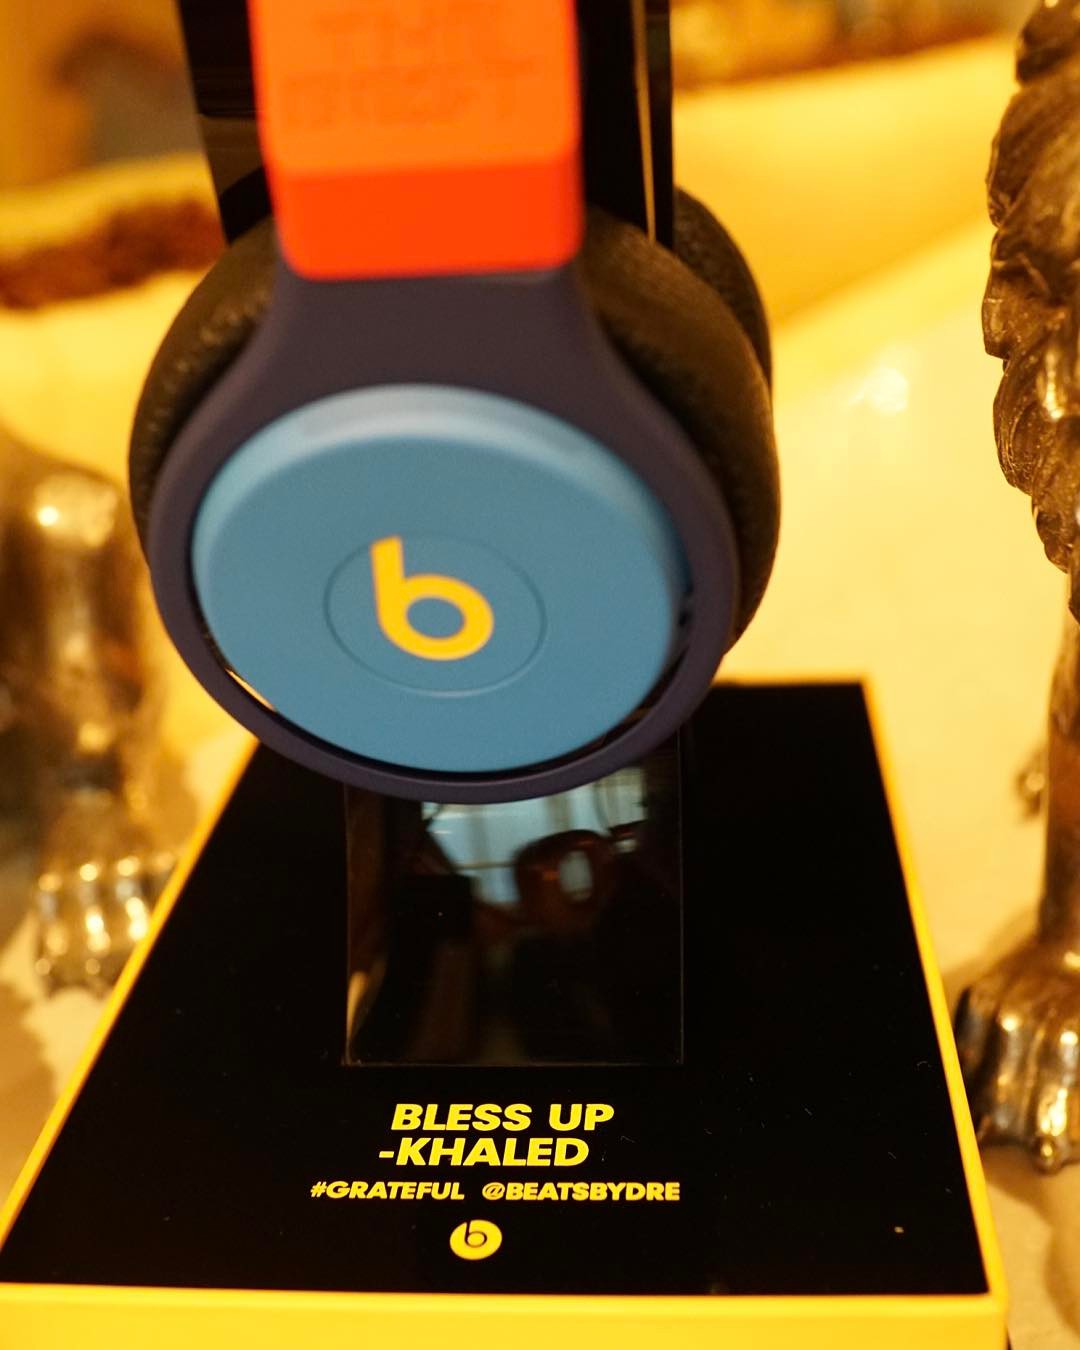 Beats by Dre (@beatsbydre) • Instagram photos and videos